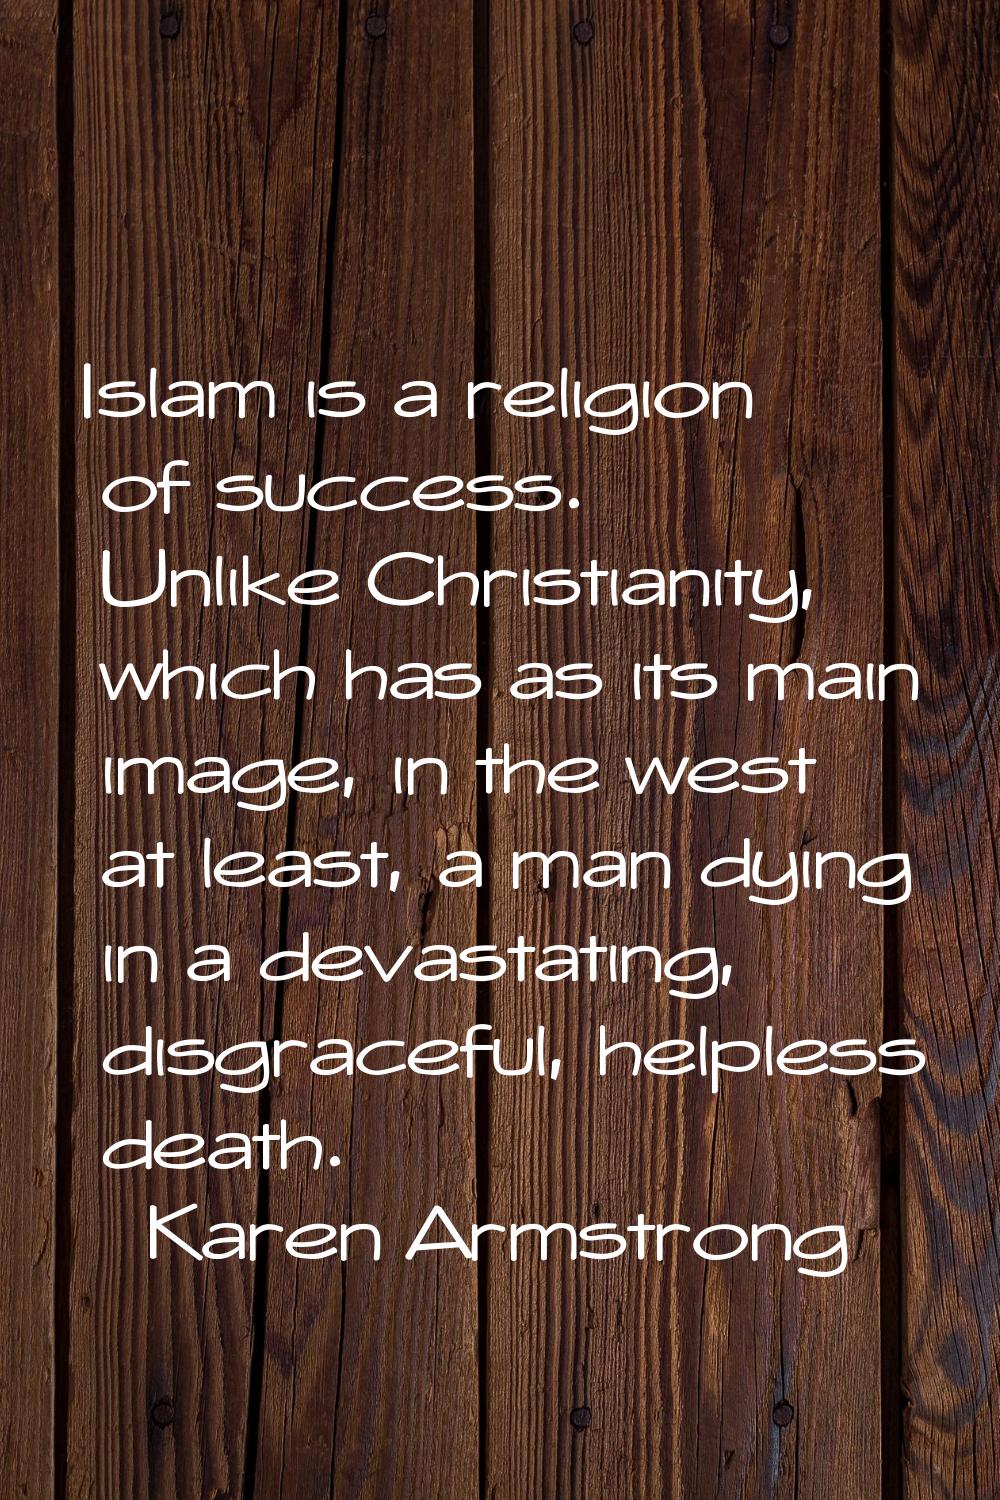 Islam is a religion of success. Unlike Christianity, which has as its main image, in the west at le